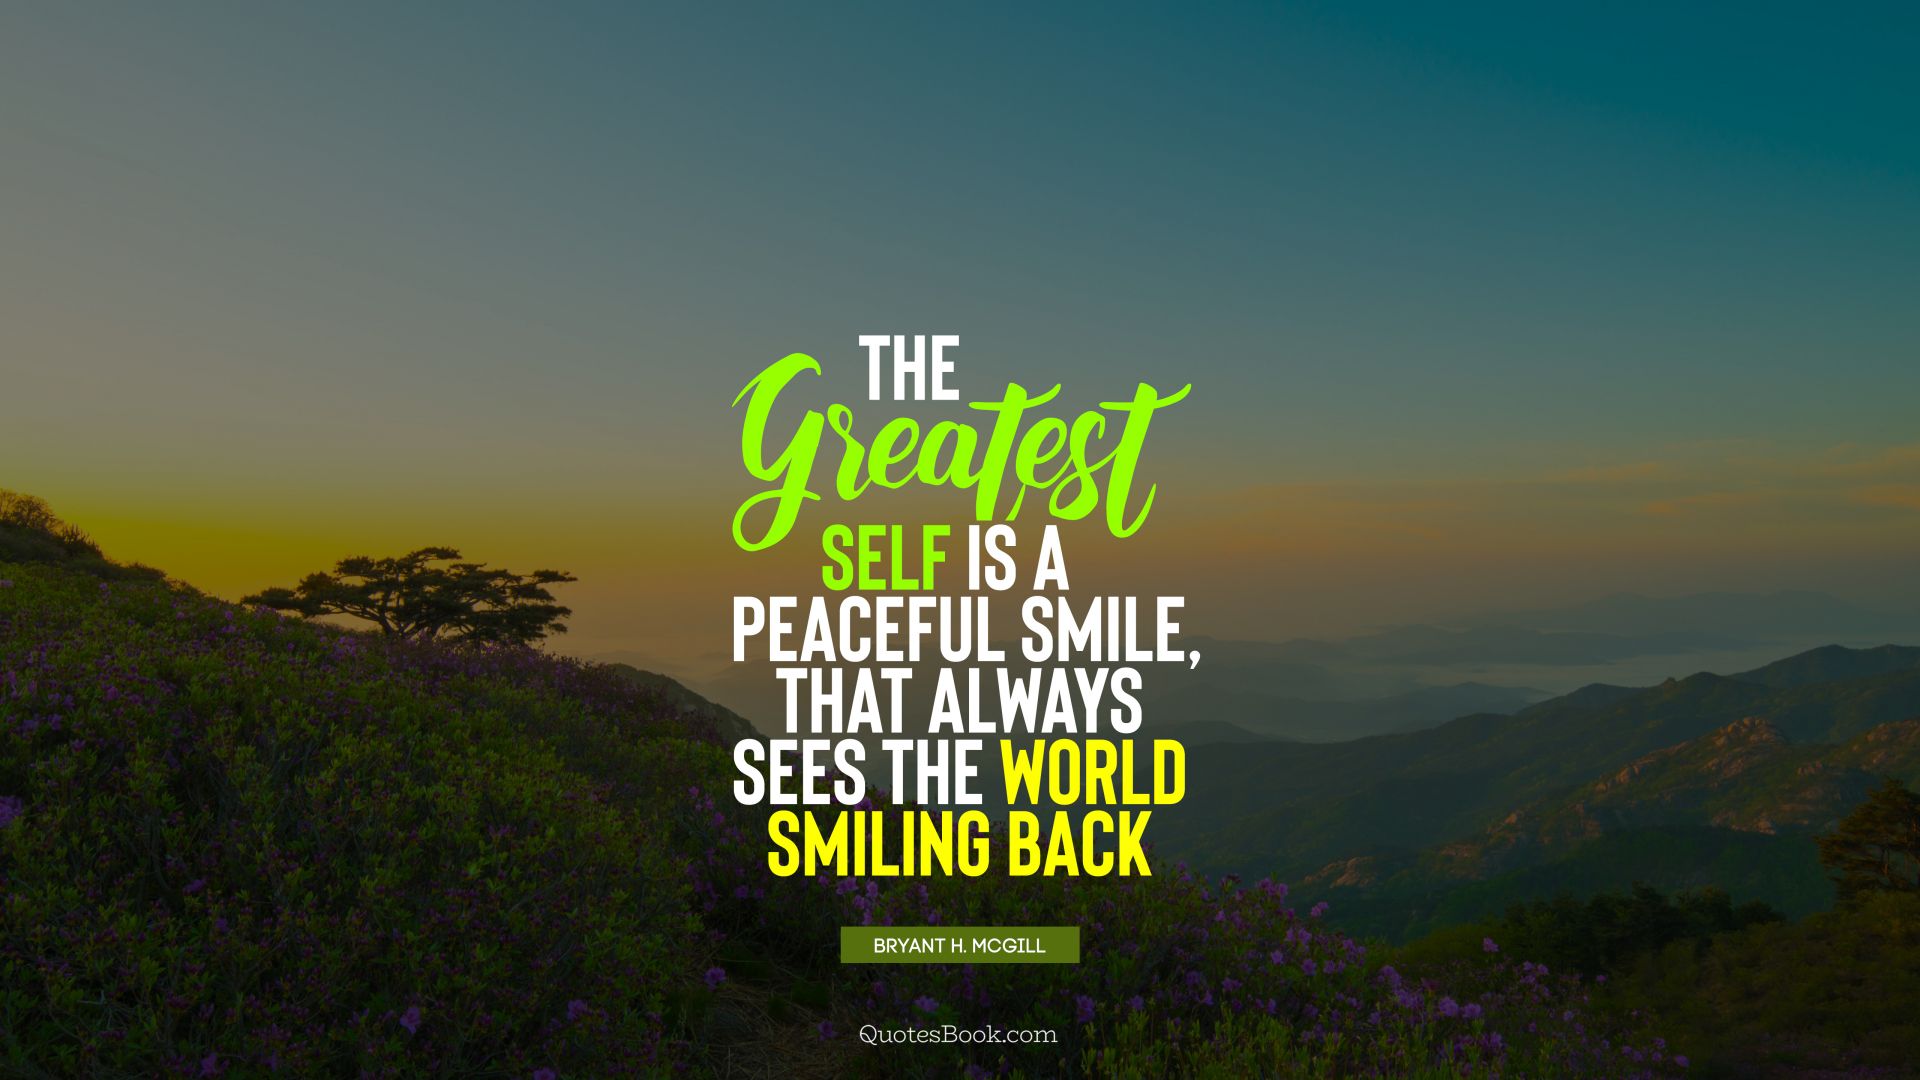 The greatest self is a peaceful smile, that always sees the world smiling back. - Quote by Bryant H. McGill